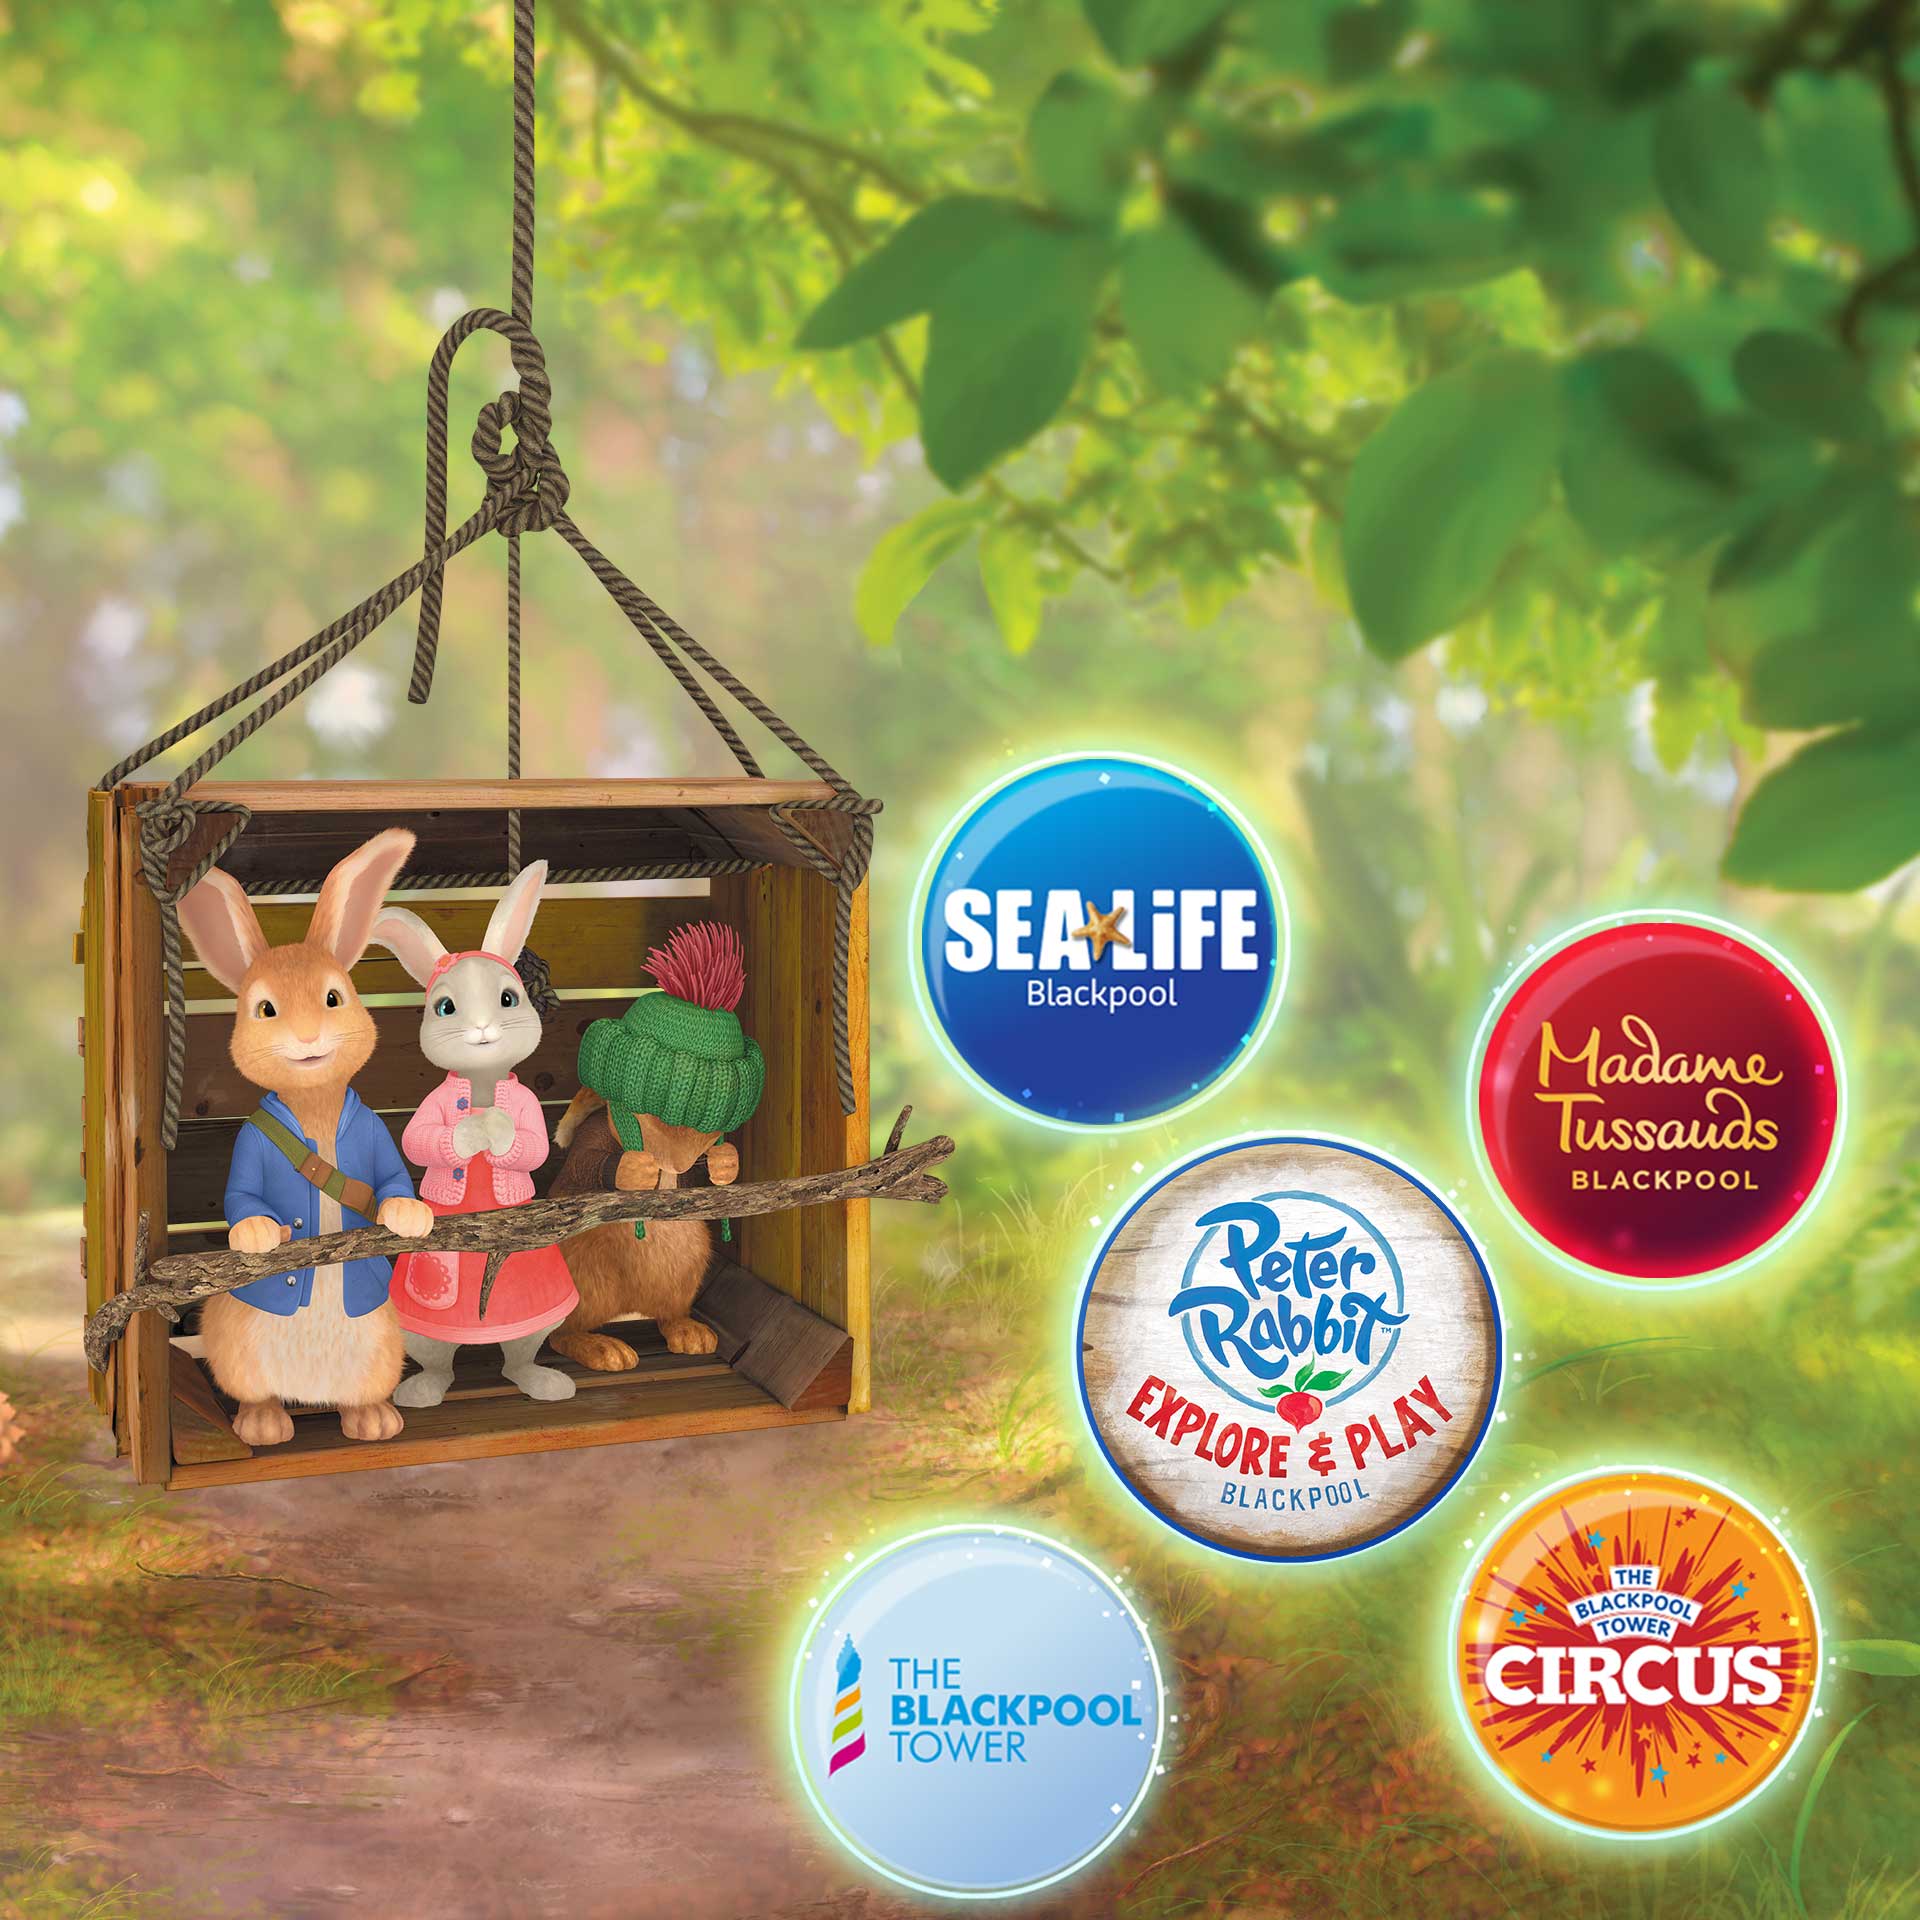 Peter Rabbit Explore and Play Blackpool plus Blackpool Attractions